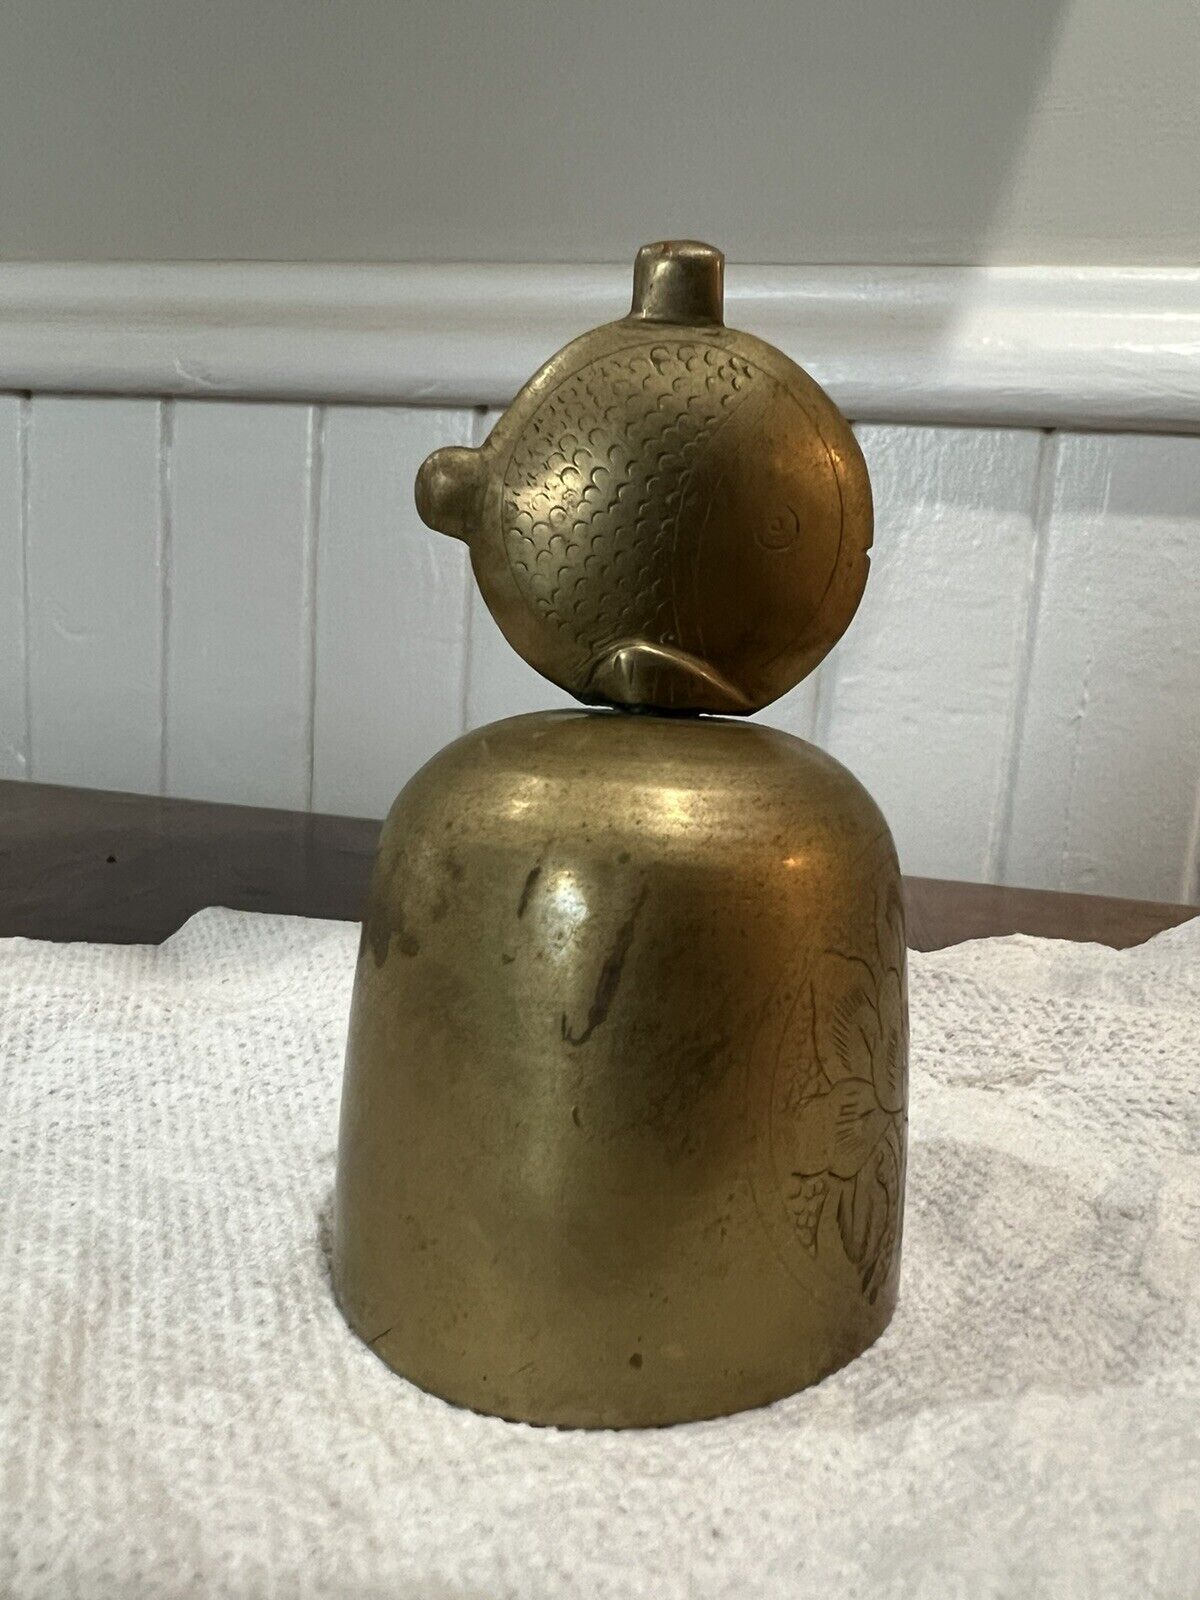 Mid-20th C. VINTAGE BRASS FISH ENGRAVED DINNER BELL